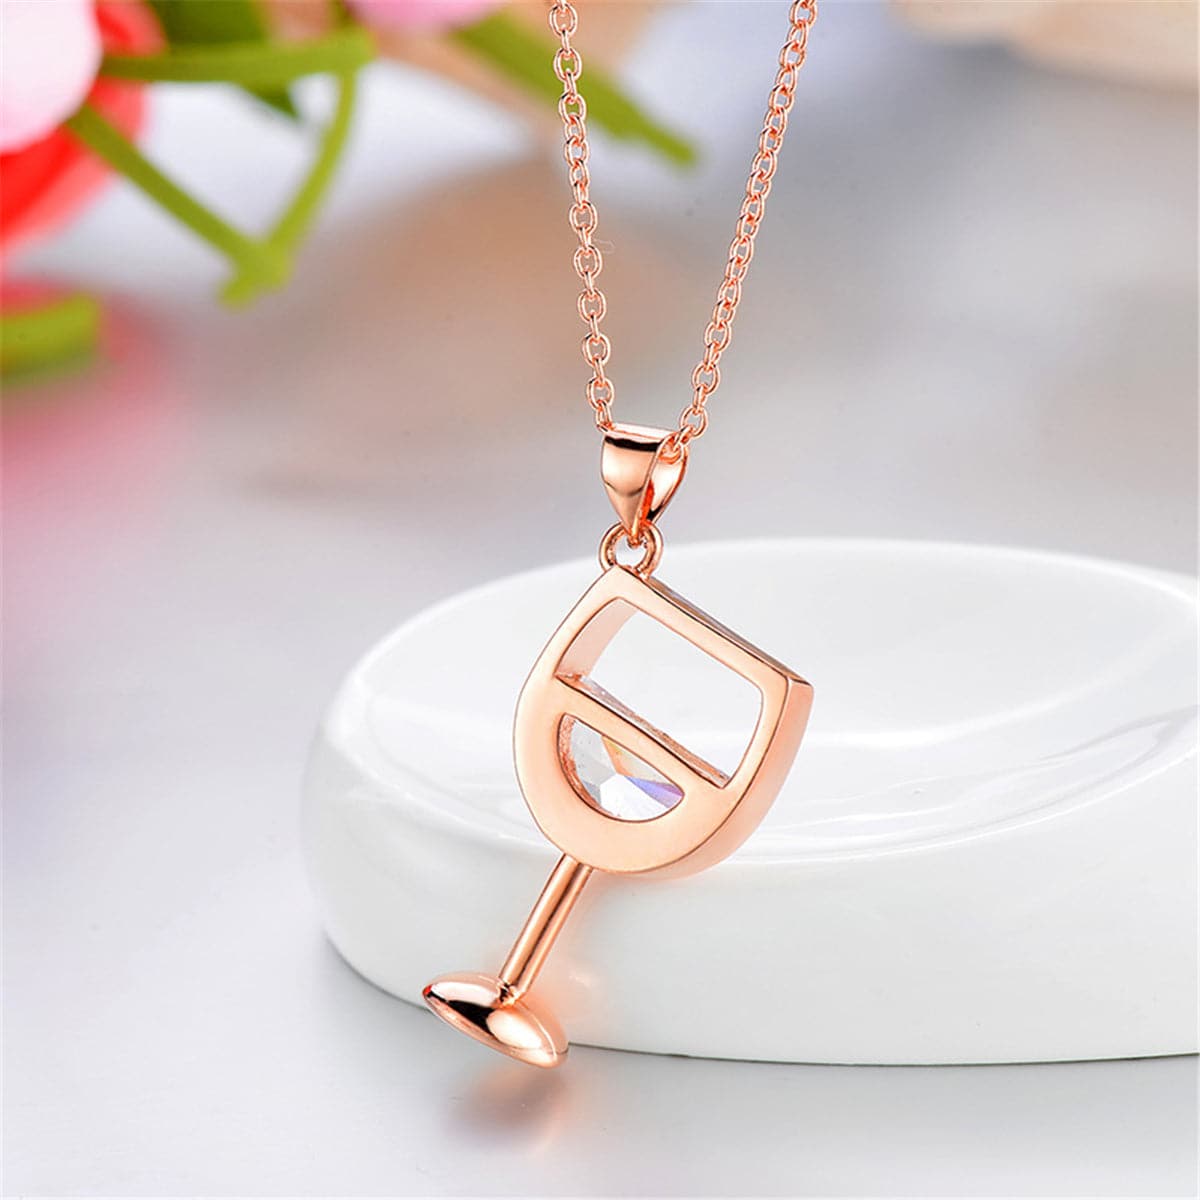 Crystal & 18K Rose Gold-Plated Wineglass Pendant Necklace